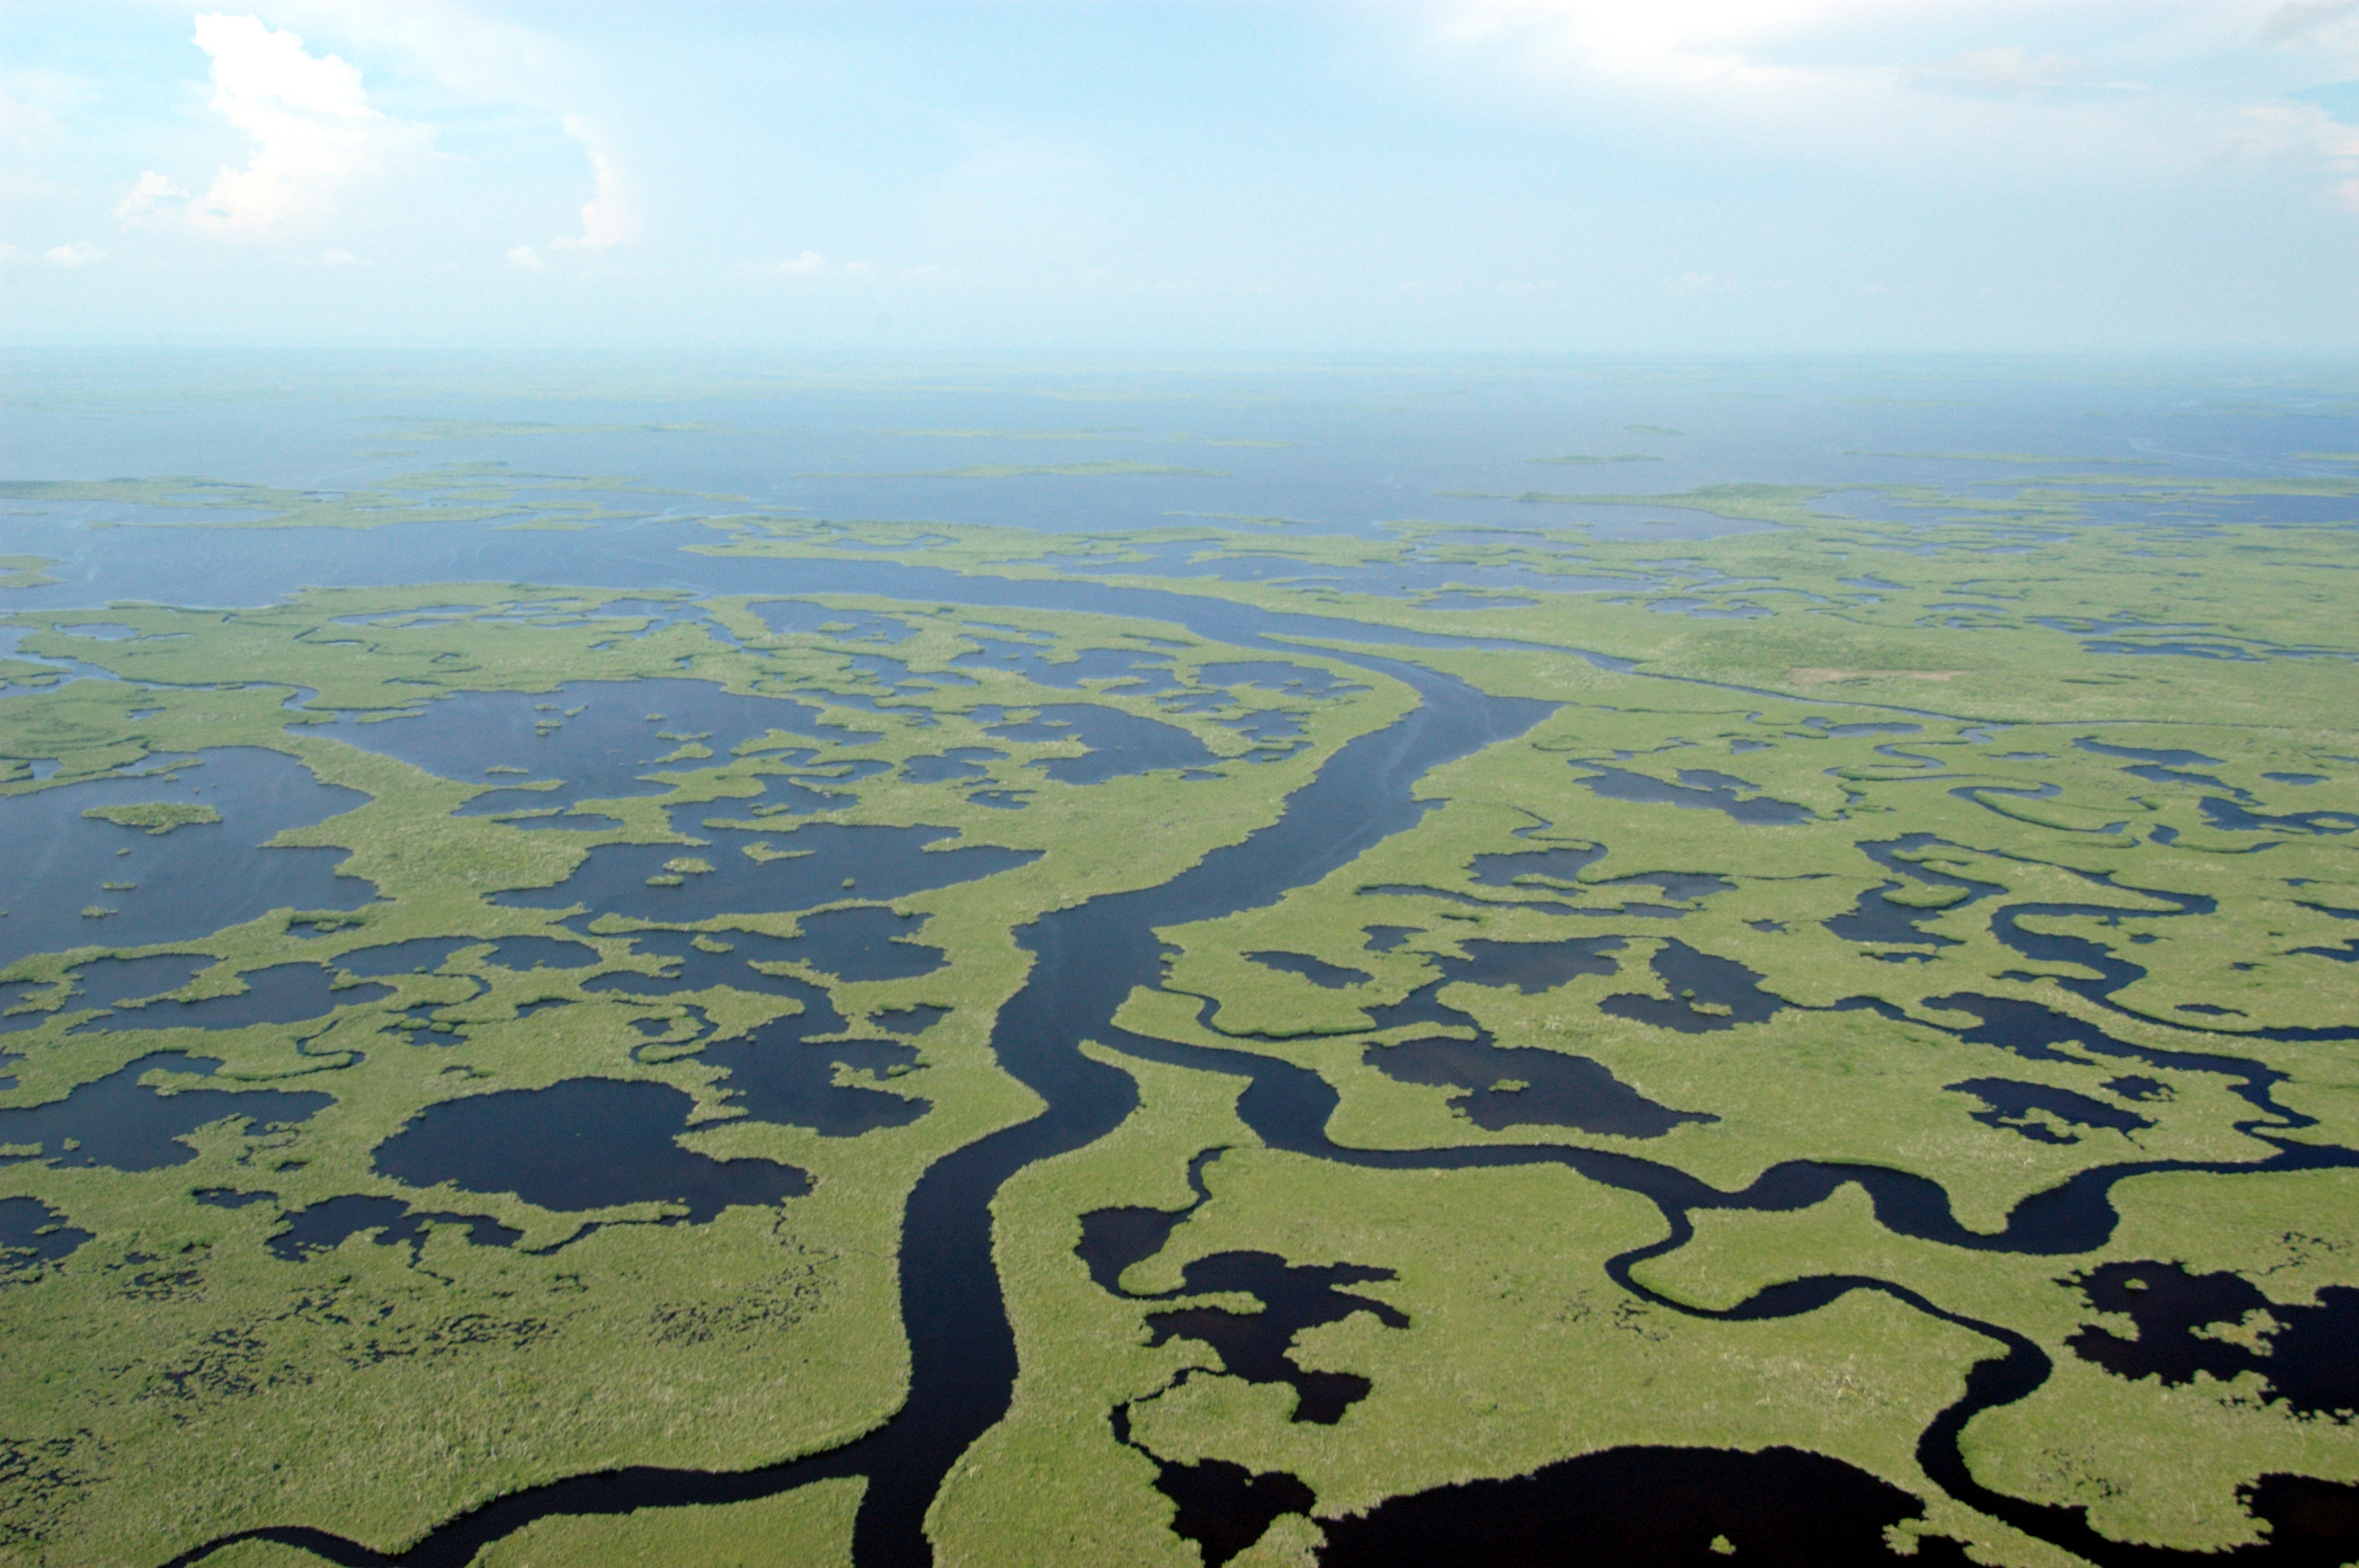 Aerial view of Lane River flowing across Everglades National Park, surrounding by several smaller bodies of water.